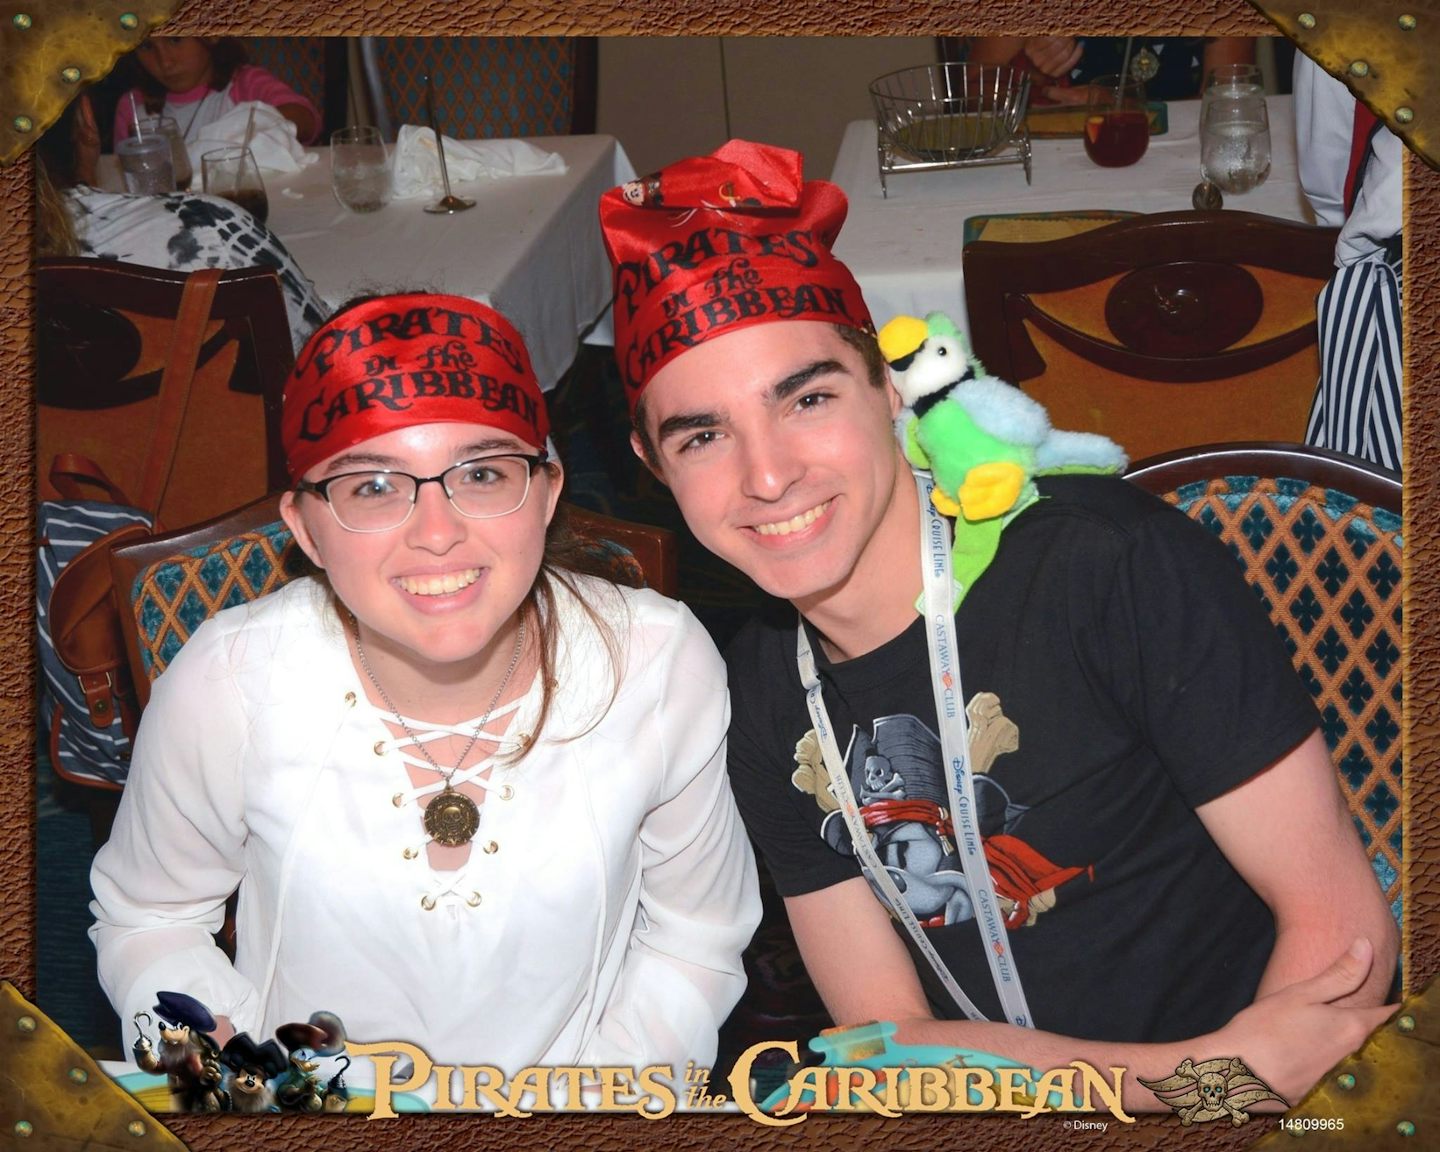 Pirate night was a blast !!! Even the teens who were too cool to participate before we left Phoenix got into it :)